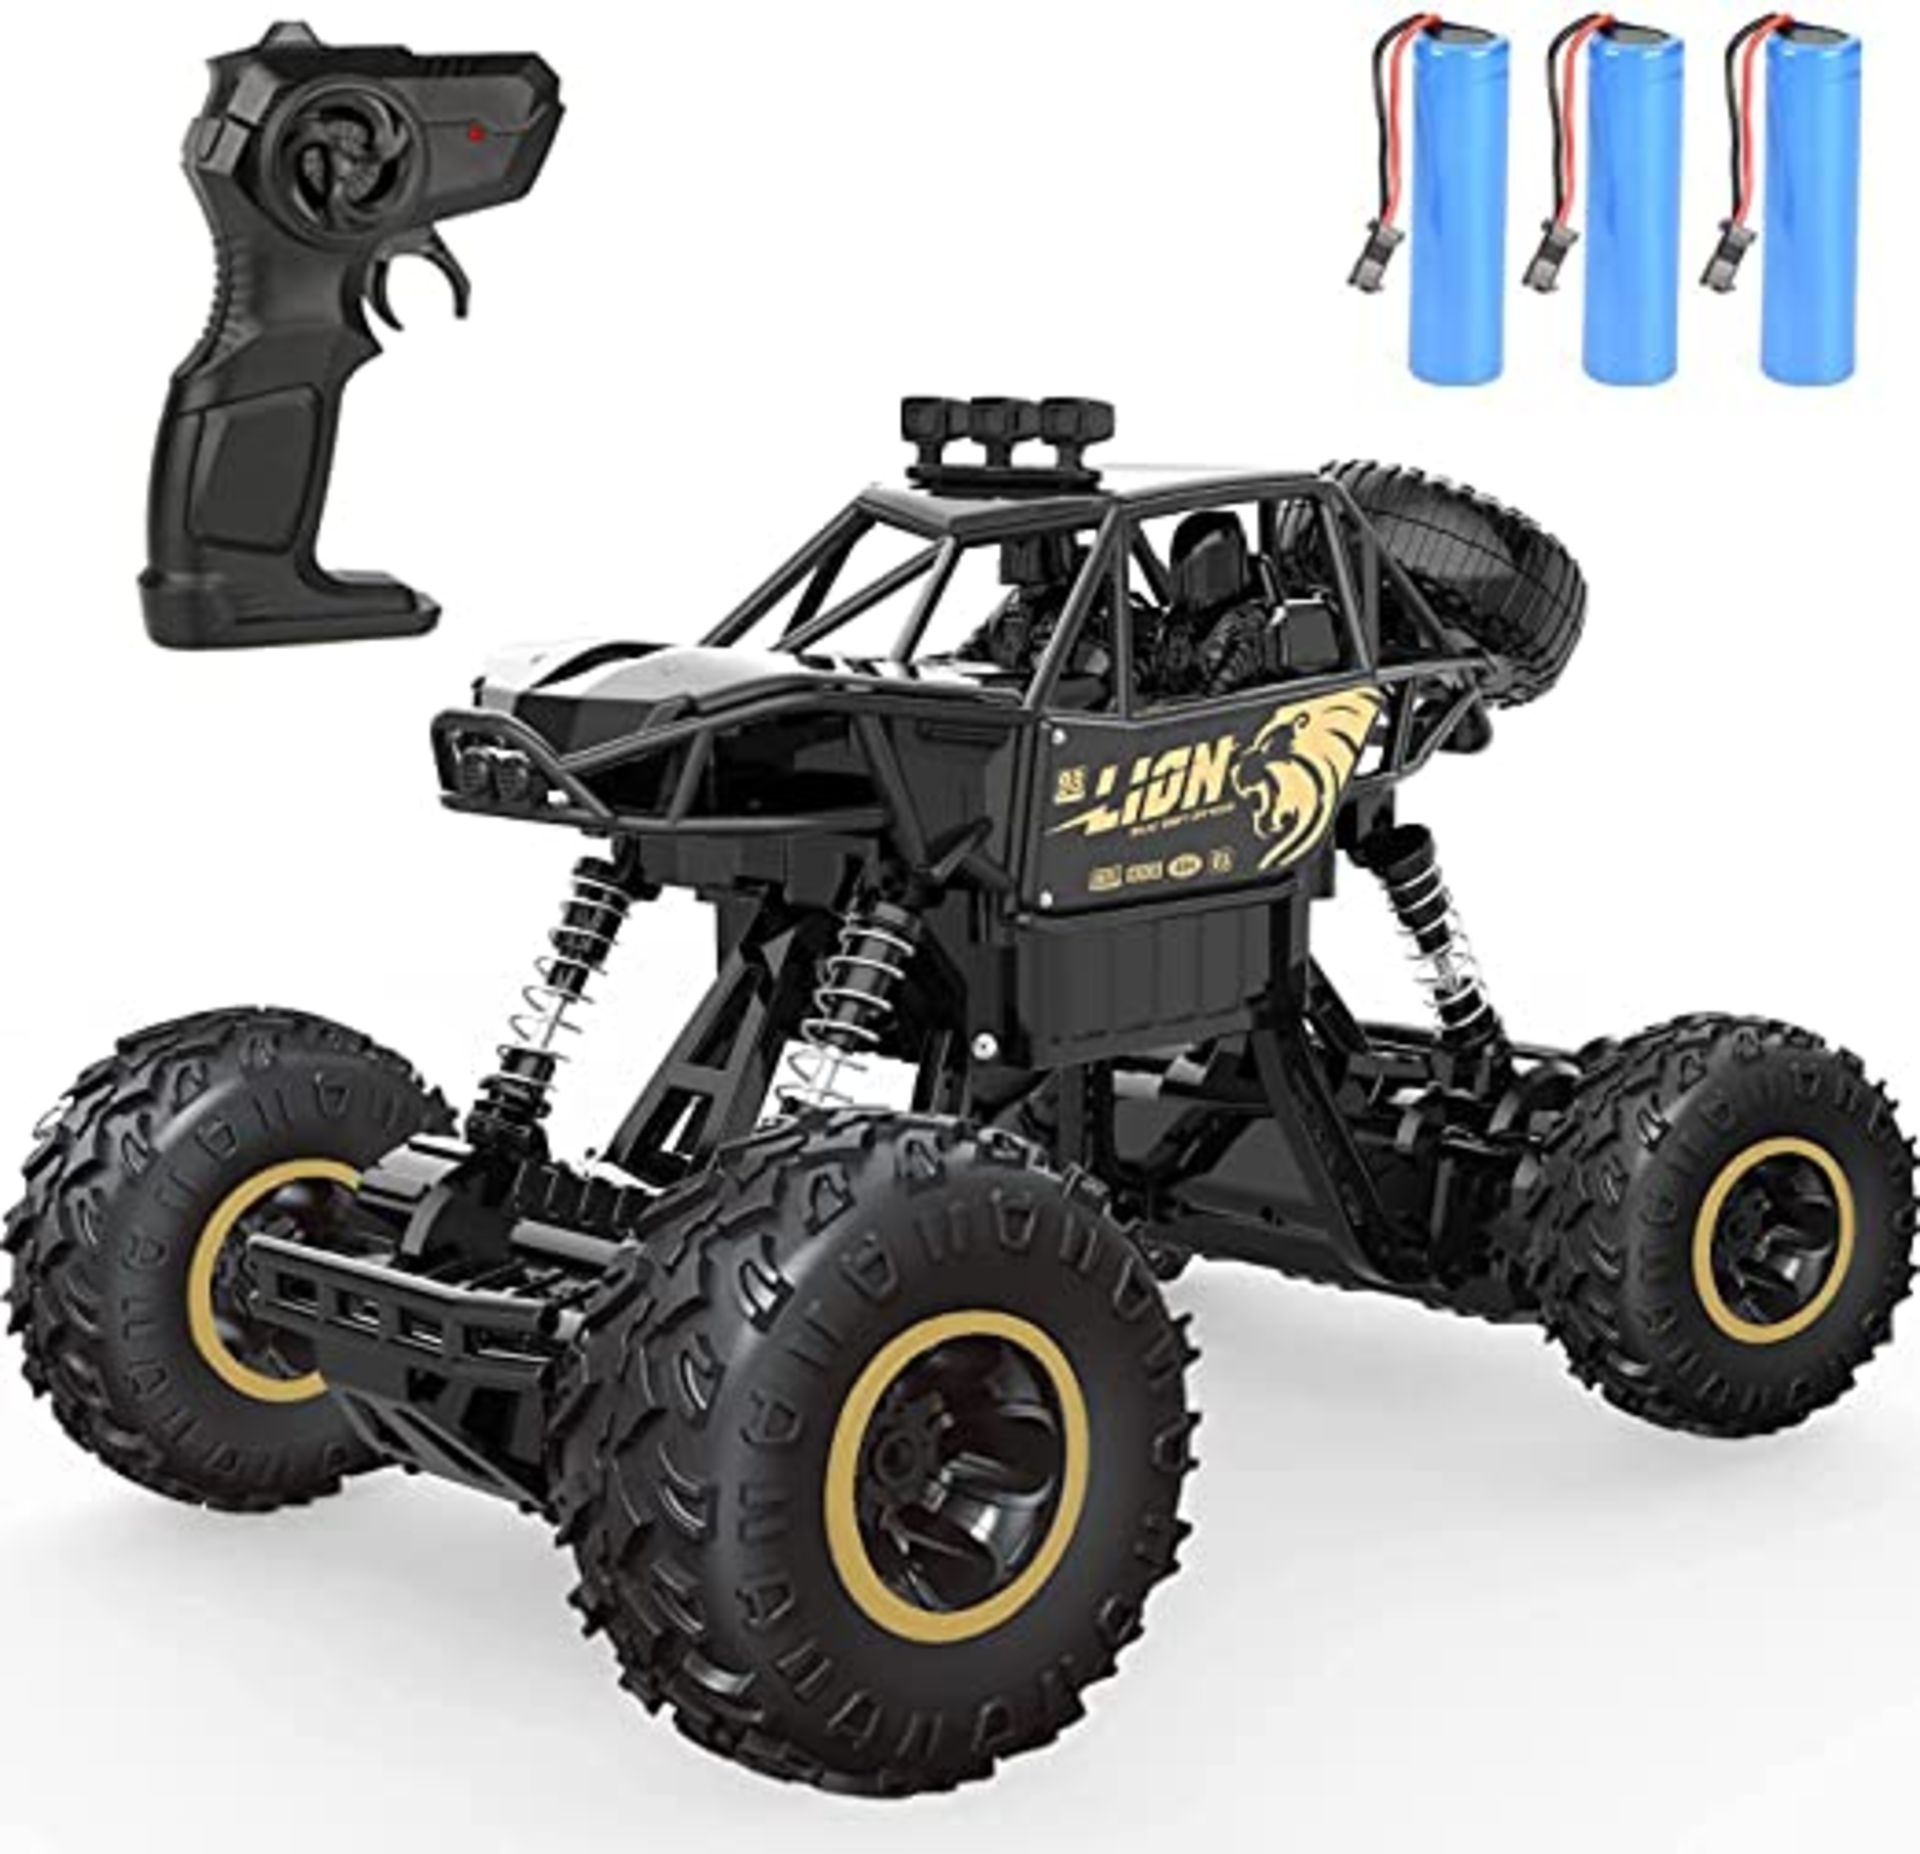 4 x DRC C3 RC Cars Remote Control Off Road Monster Truck, Metal Shell Car 2.4Ghz 4WD Dual Motors,